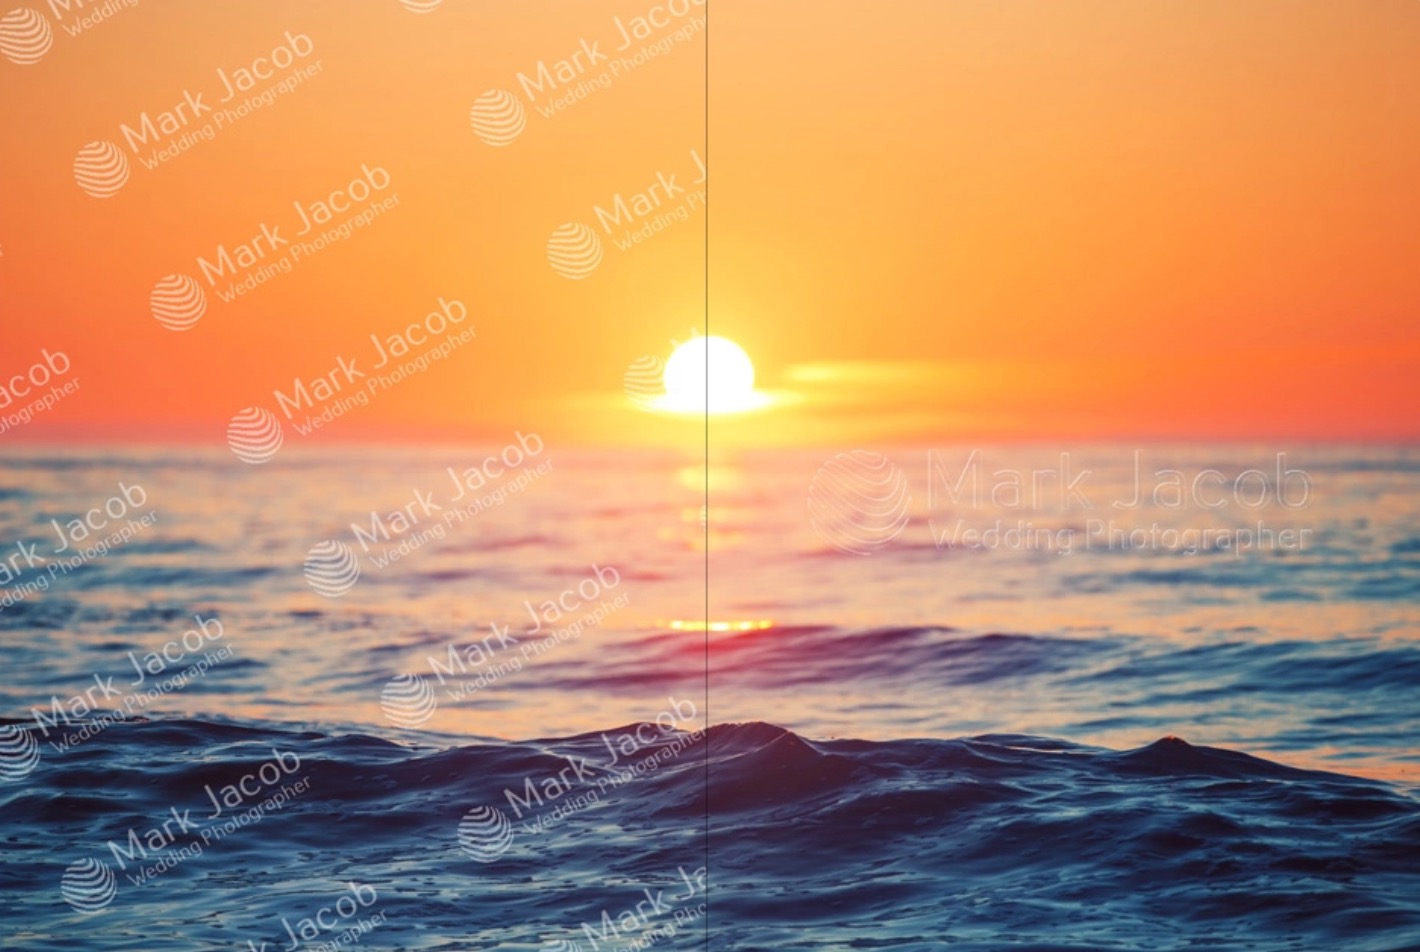 How to watermark photos